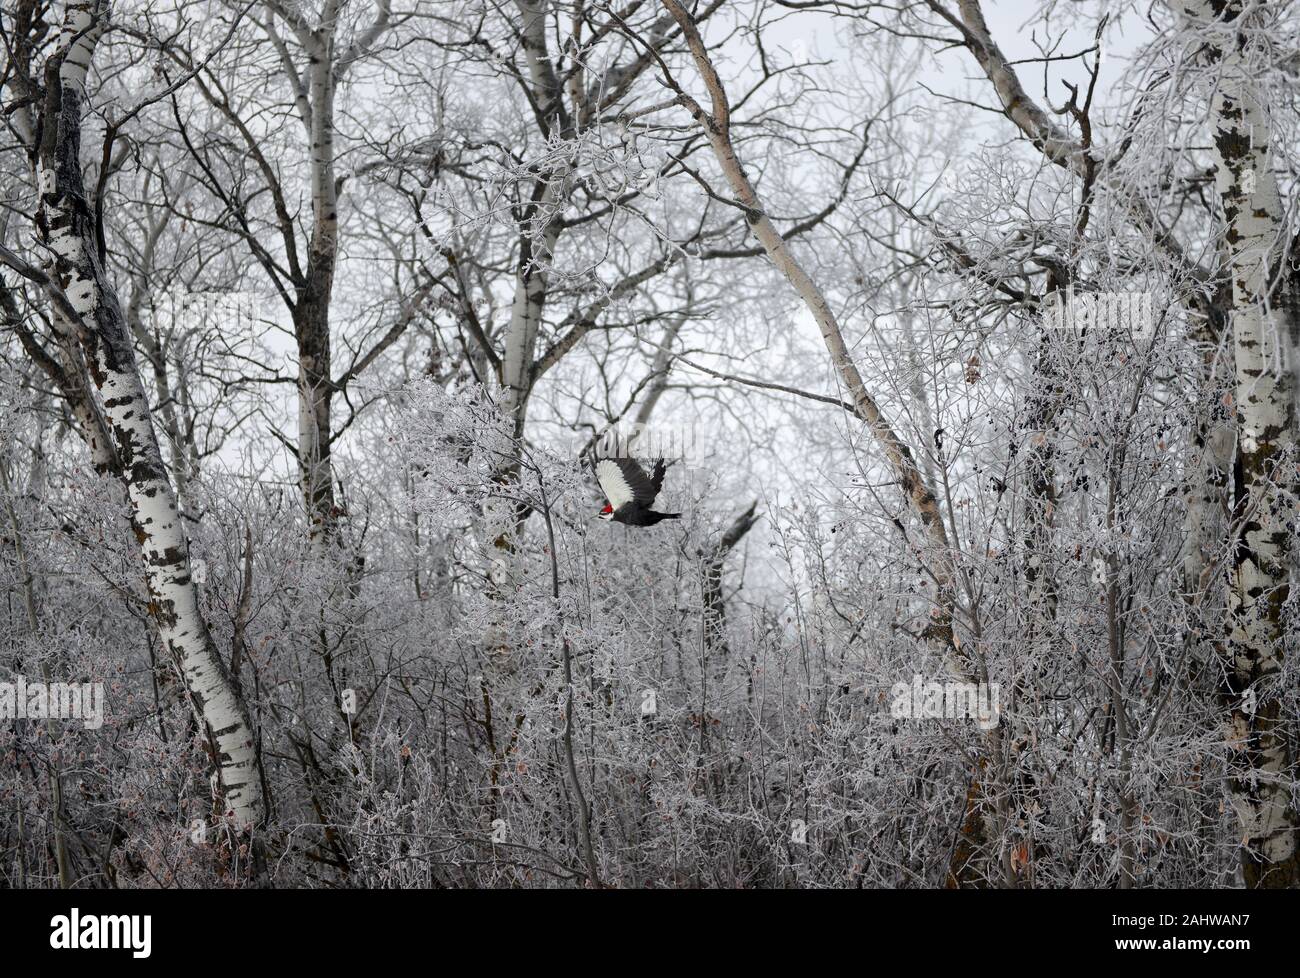 Pileated woodpecker in flight on a cold winter day in Saskatoon, Canada Stock Photo